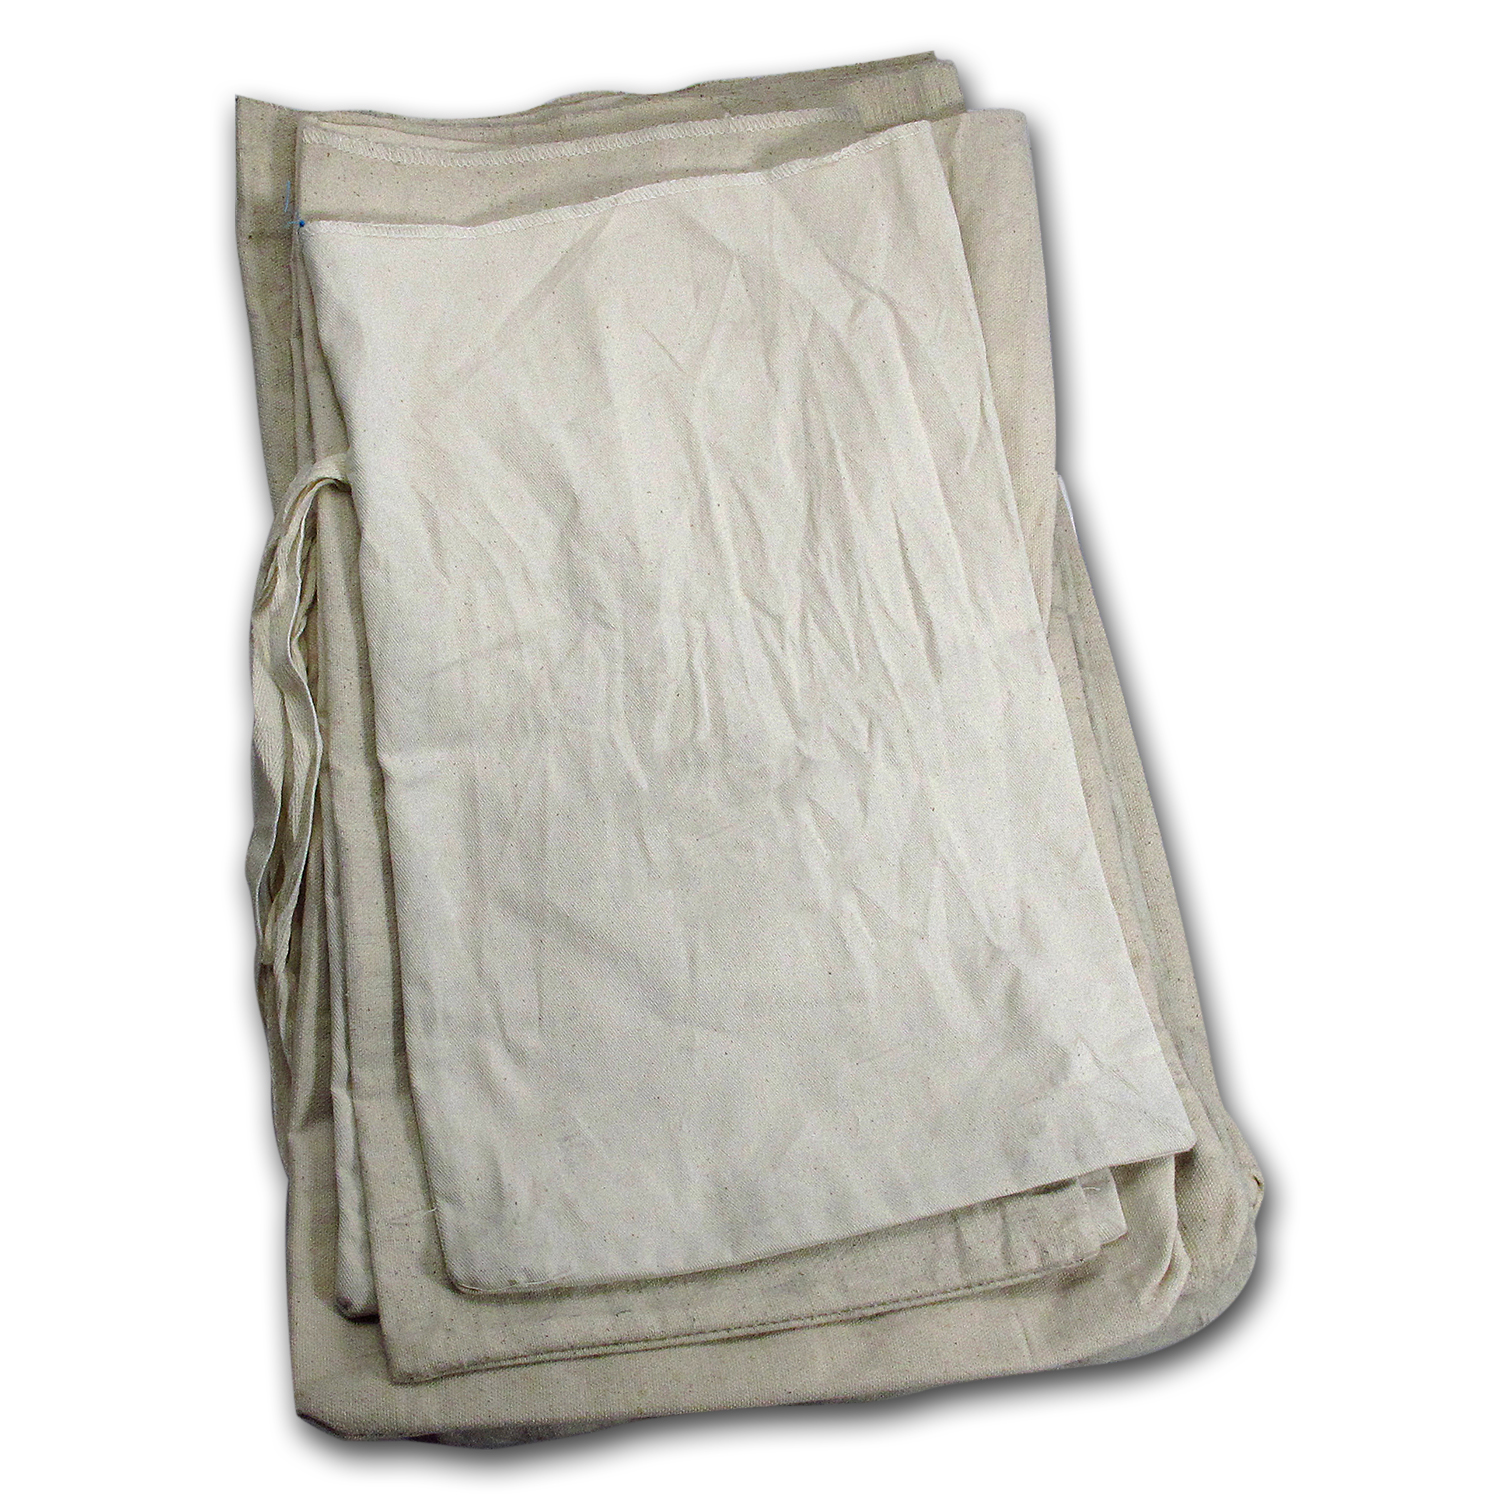 Buy Used Cloth Money Bags (10 Count Bundle)